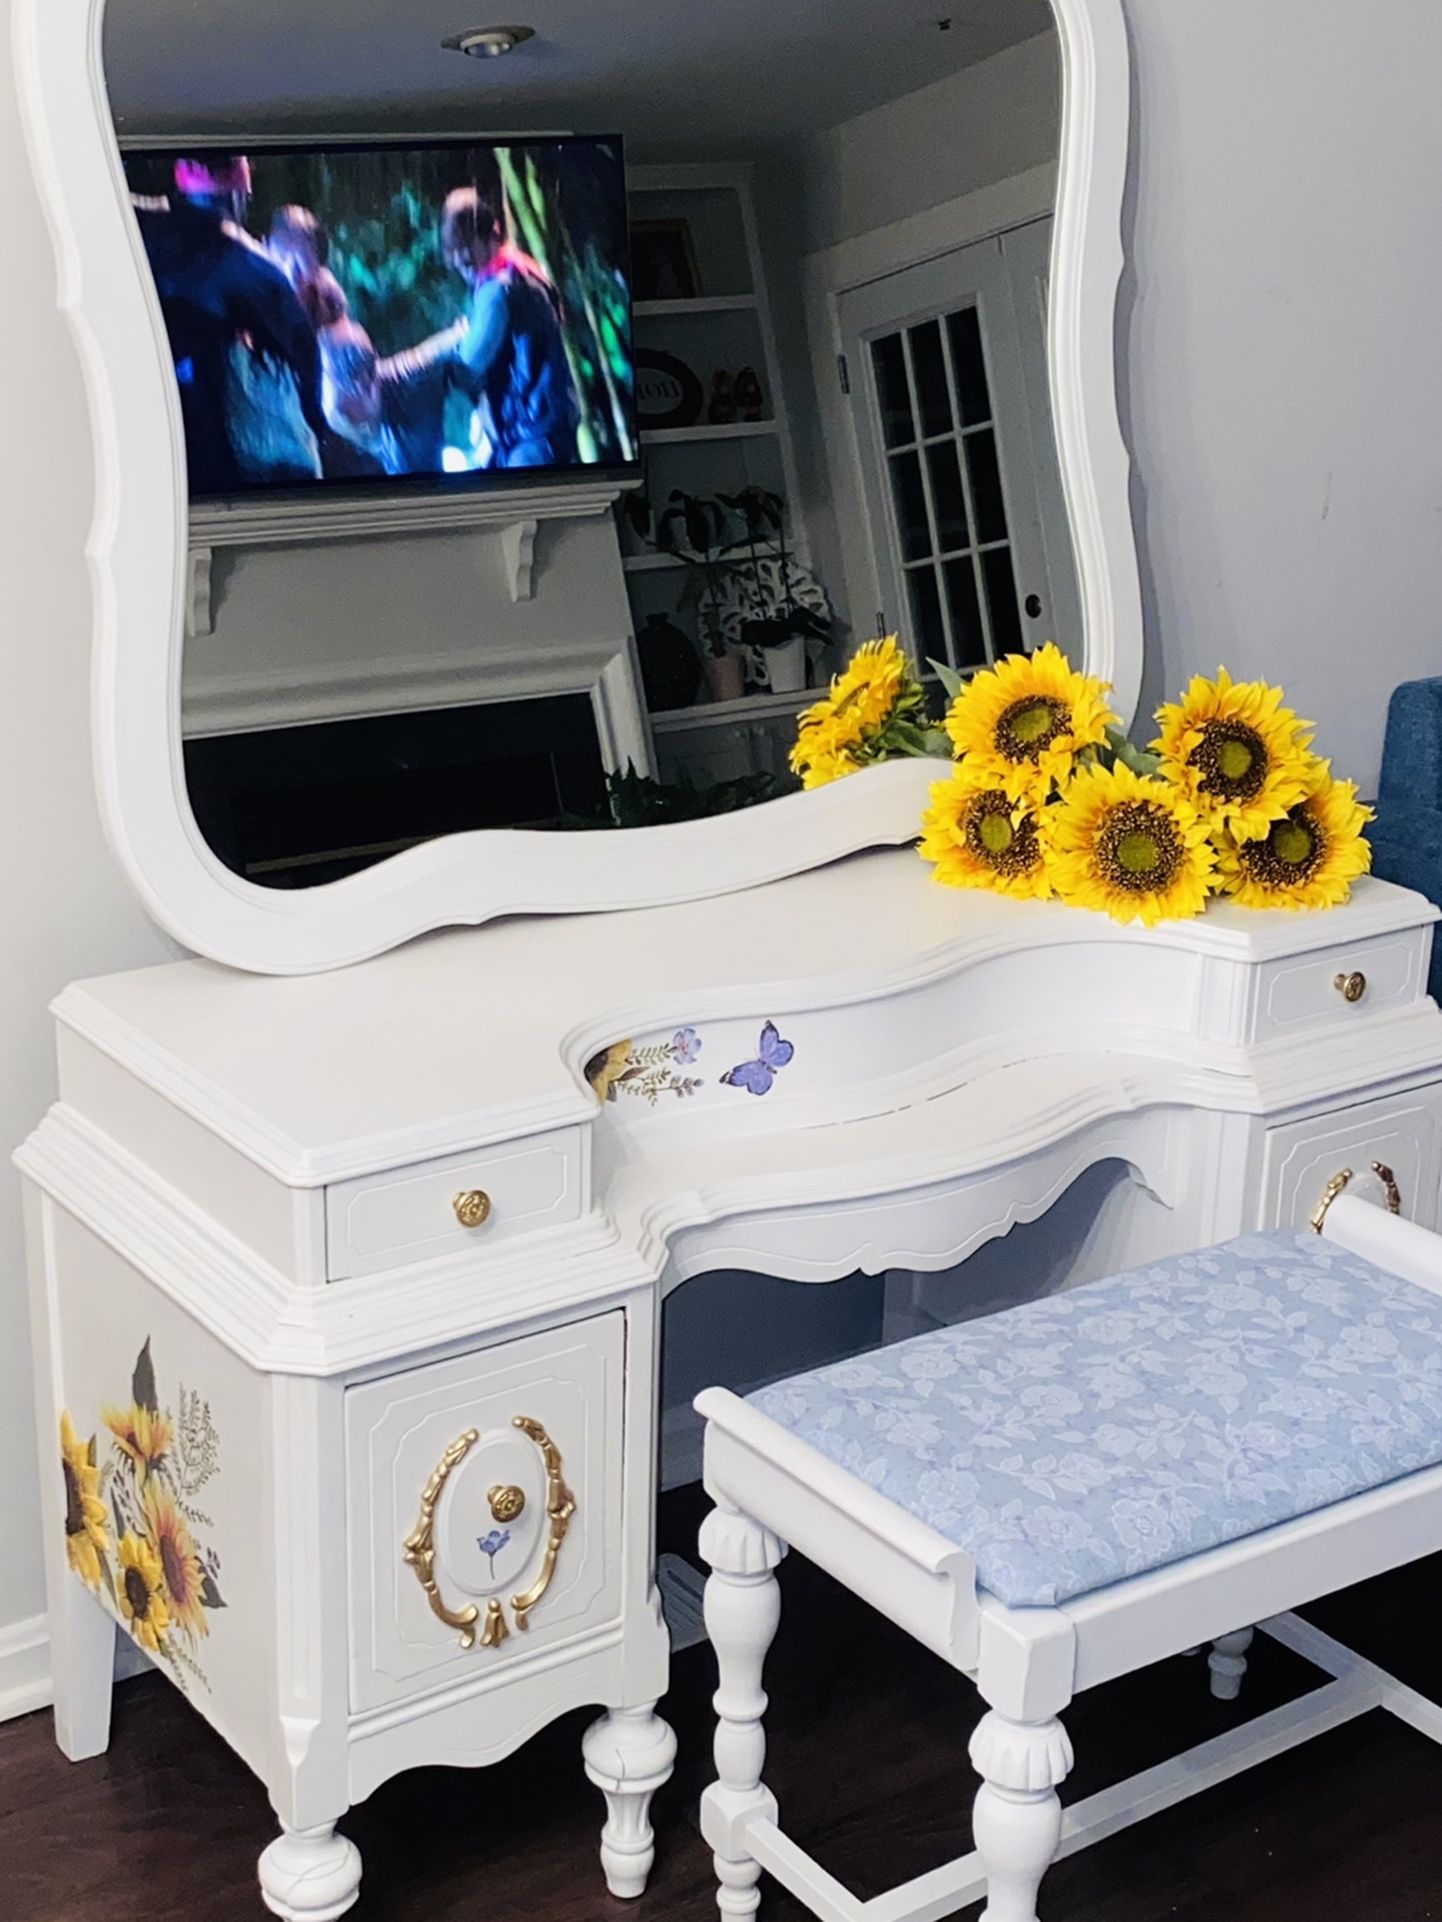 New Refurbished Vintage Vanity with sunflower 🌻 theme. Chair and mirror included!